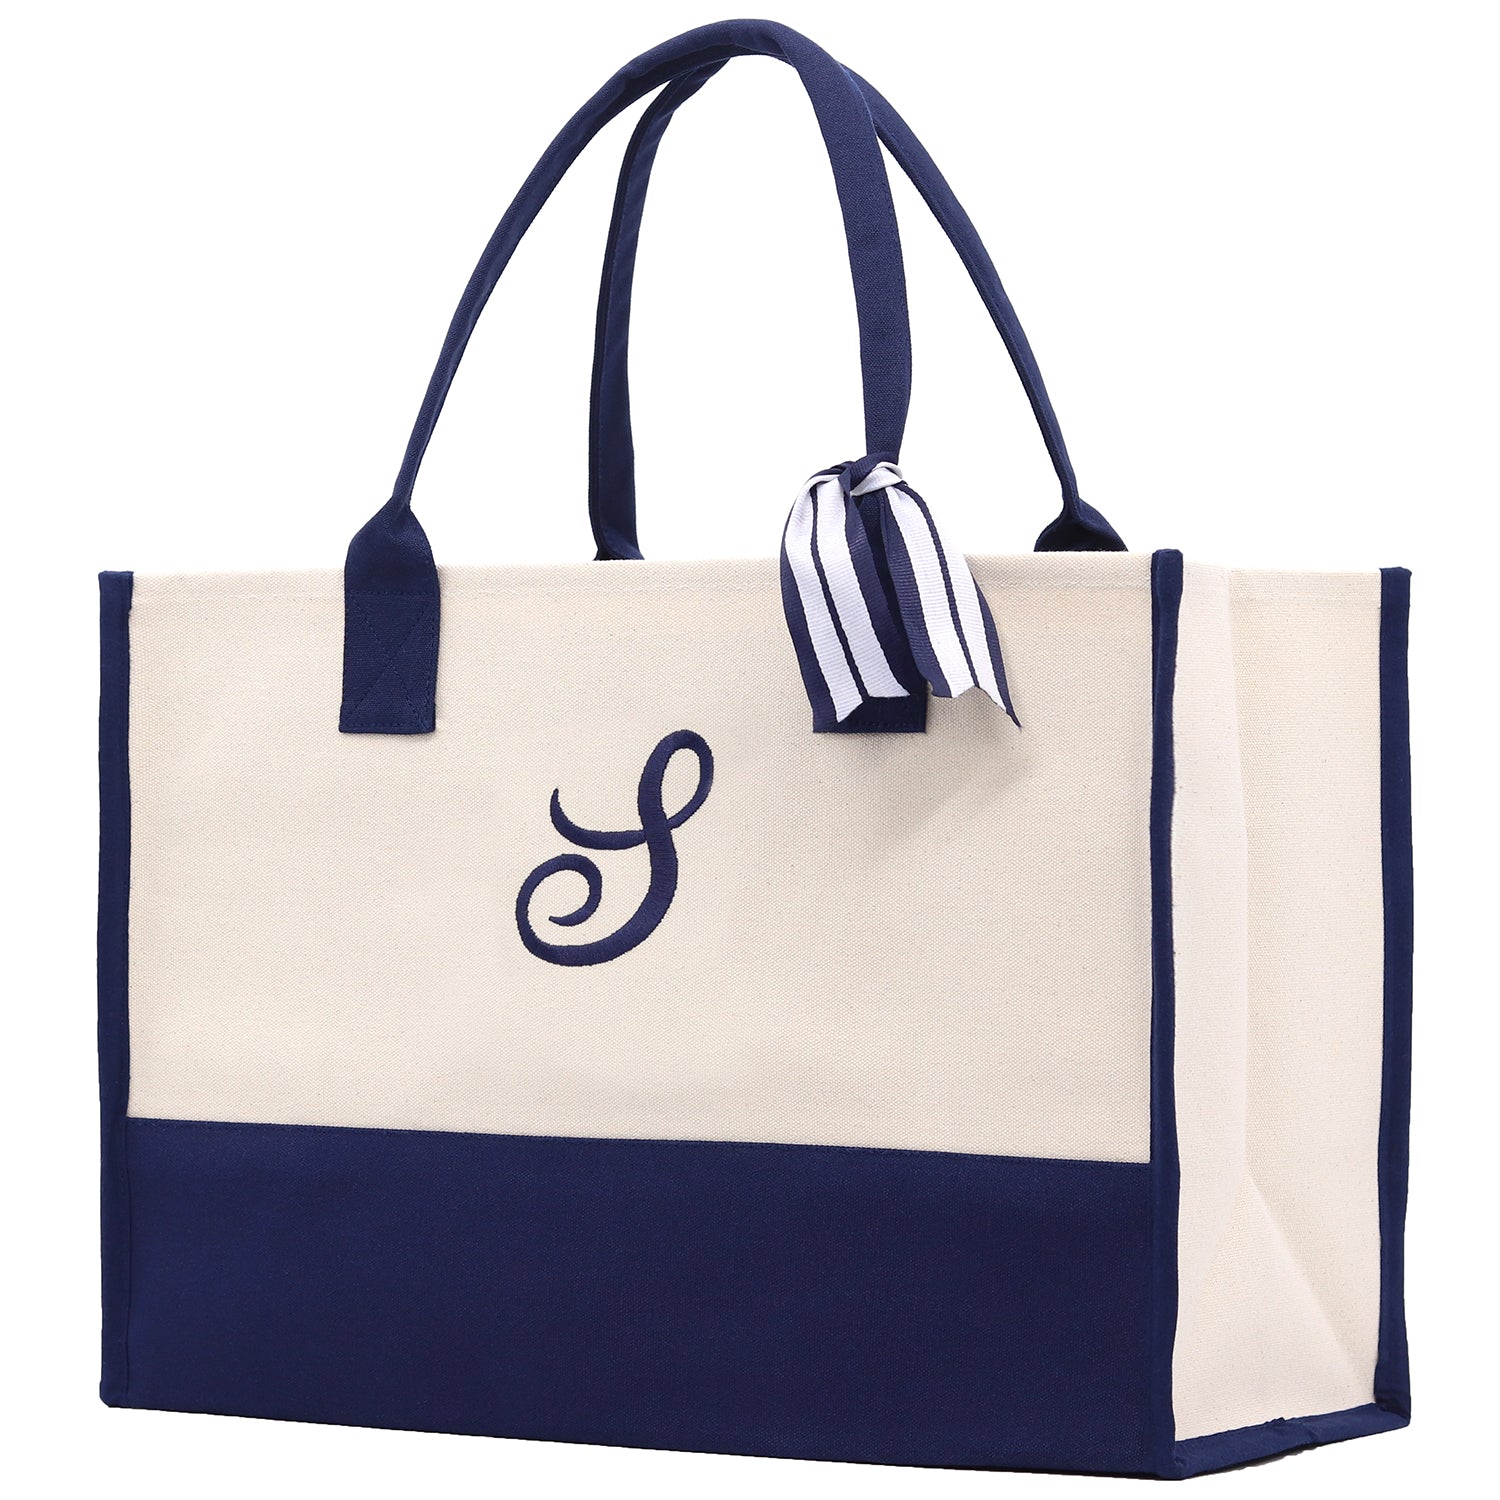 Monogram Tote Bag with 100% Cotton Canvas and a Chic Personalized Monogram Navy Blue